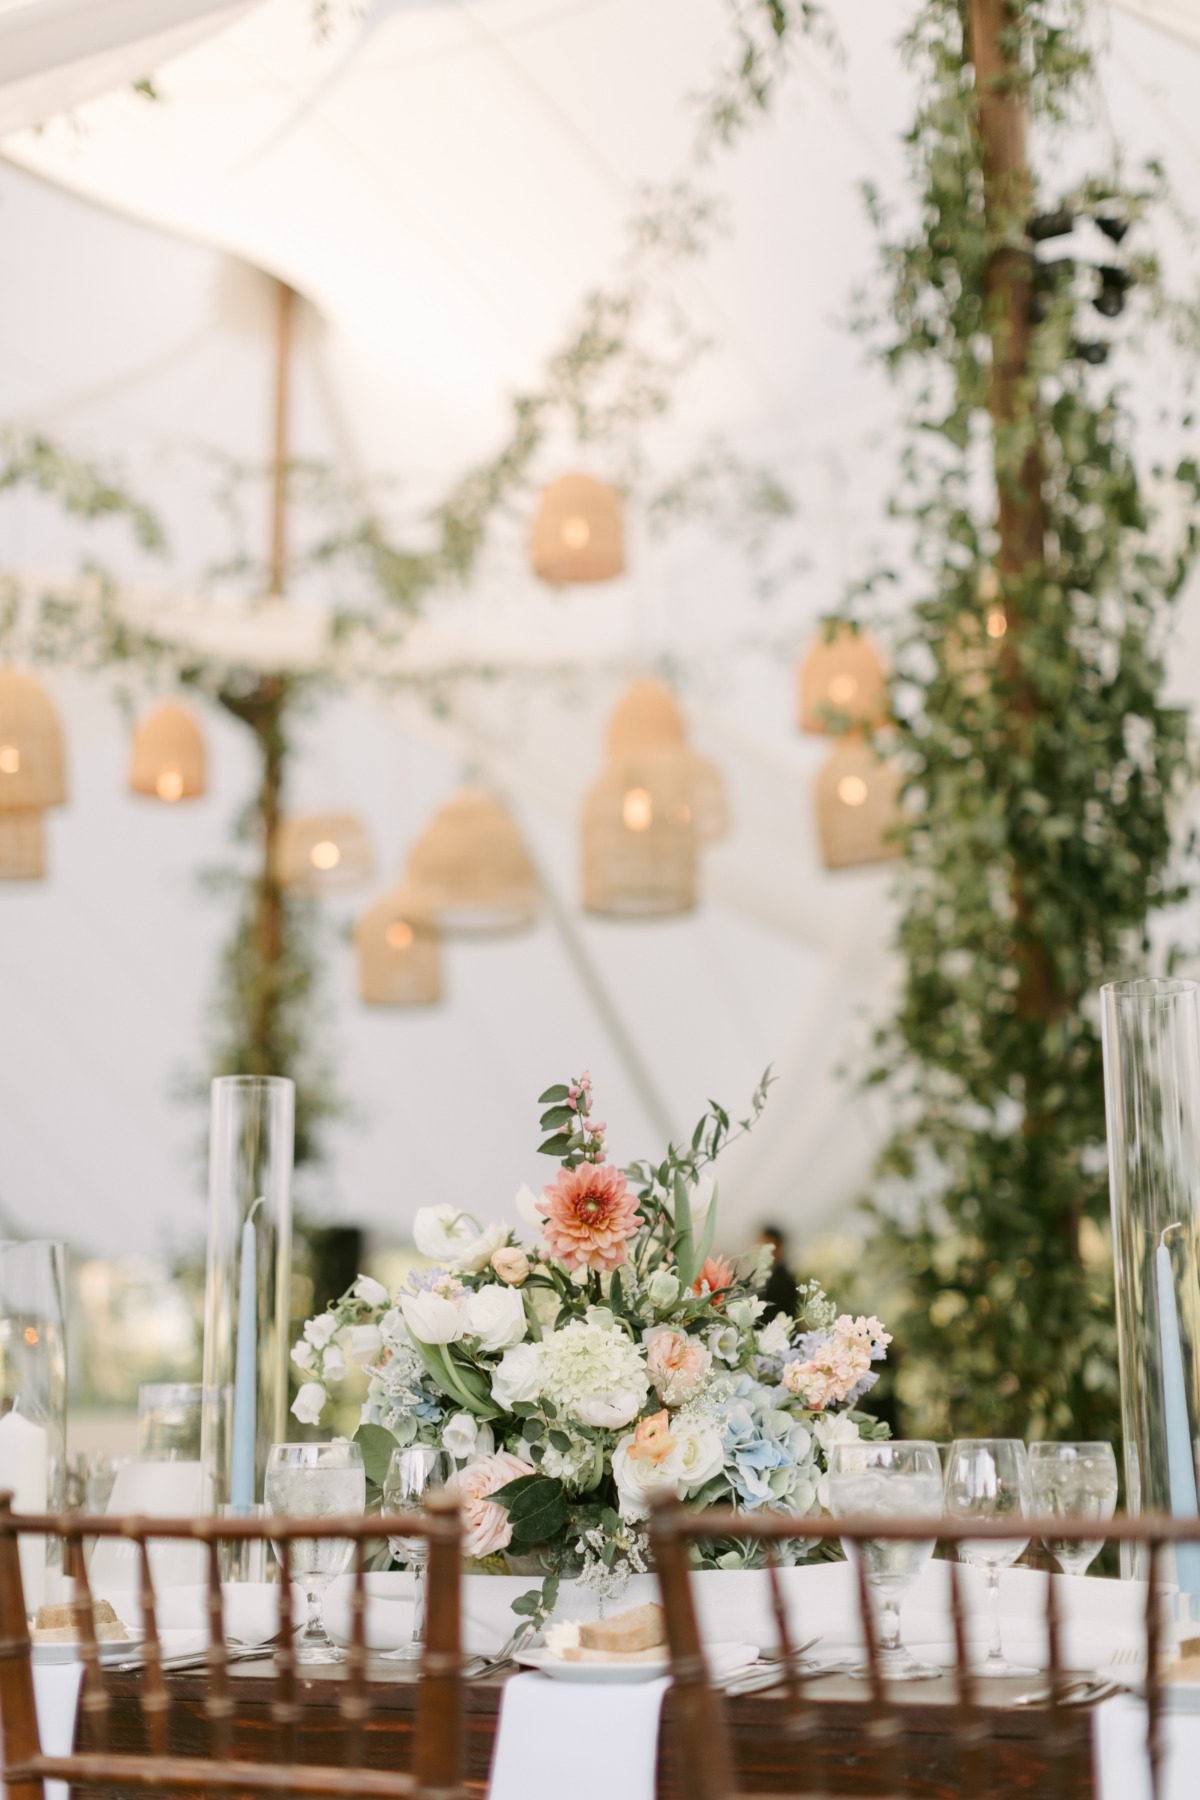 Floral centerpiece with white, pink, blue, and pops of pink-orange flowers